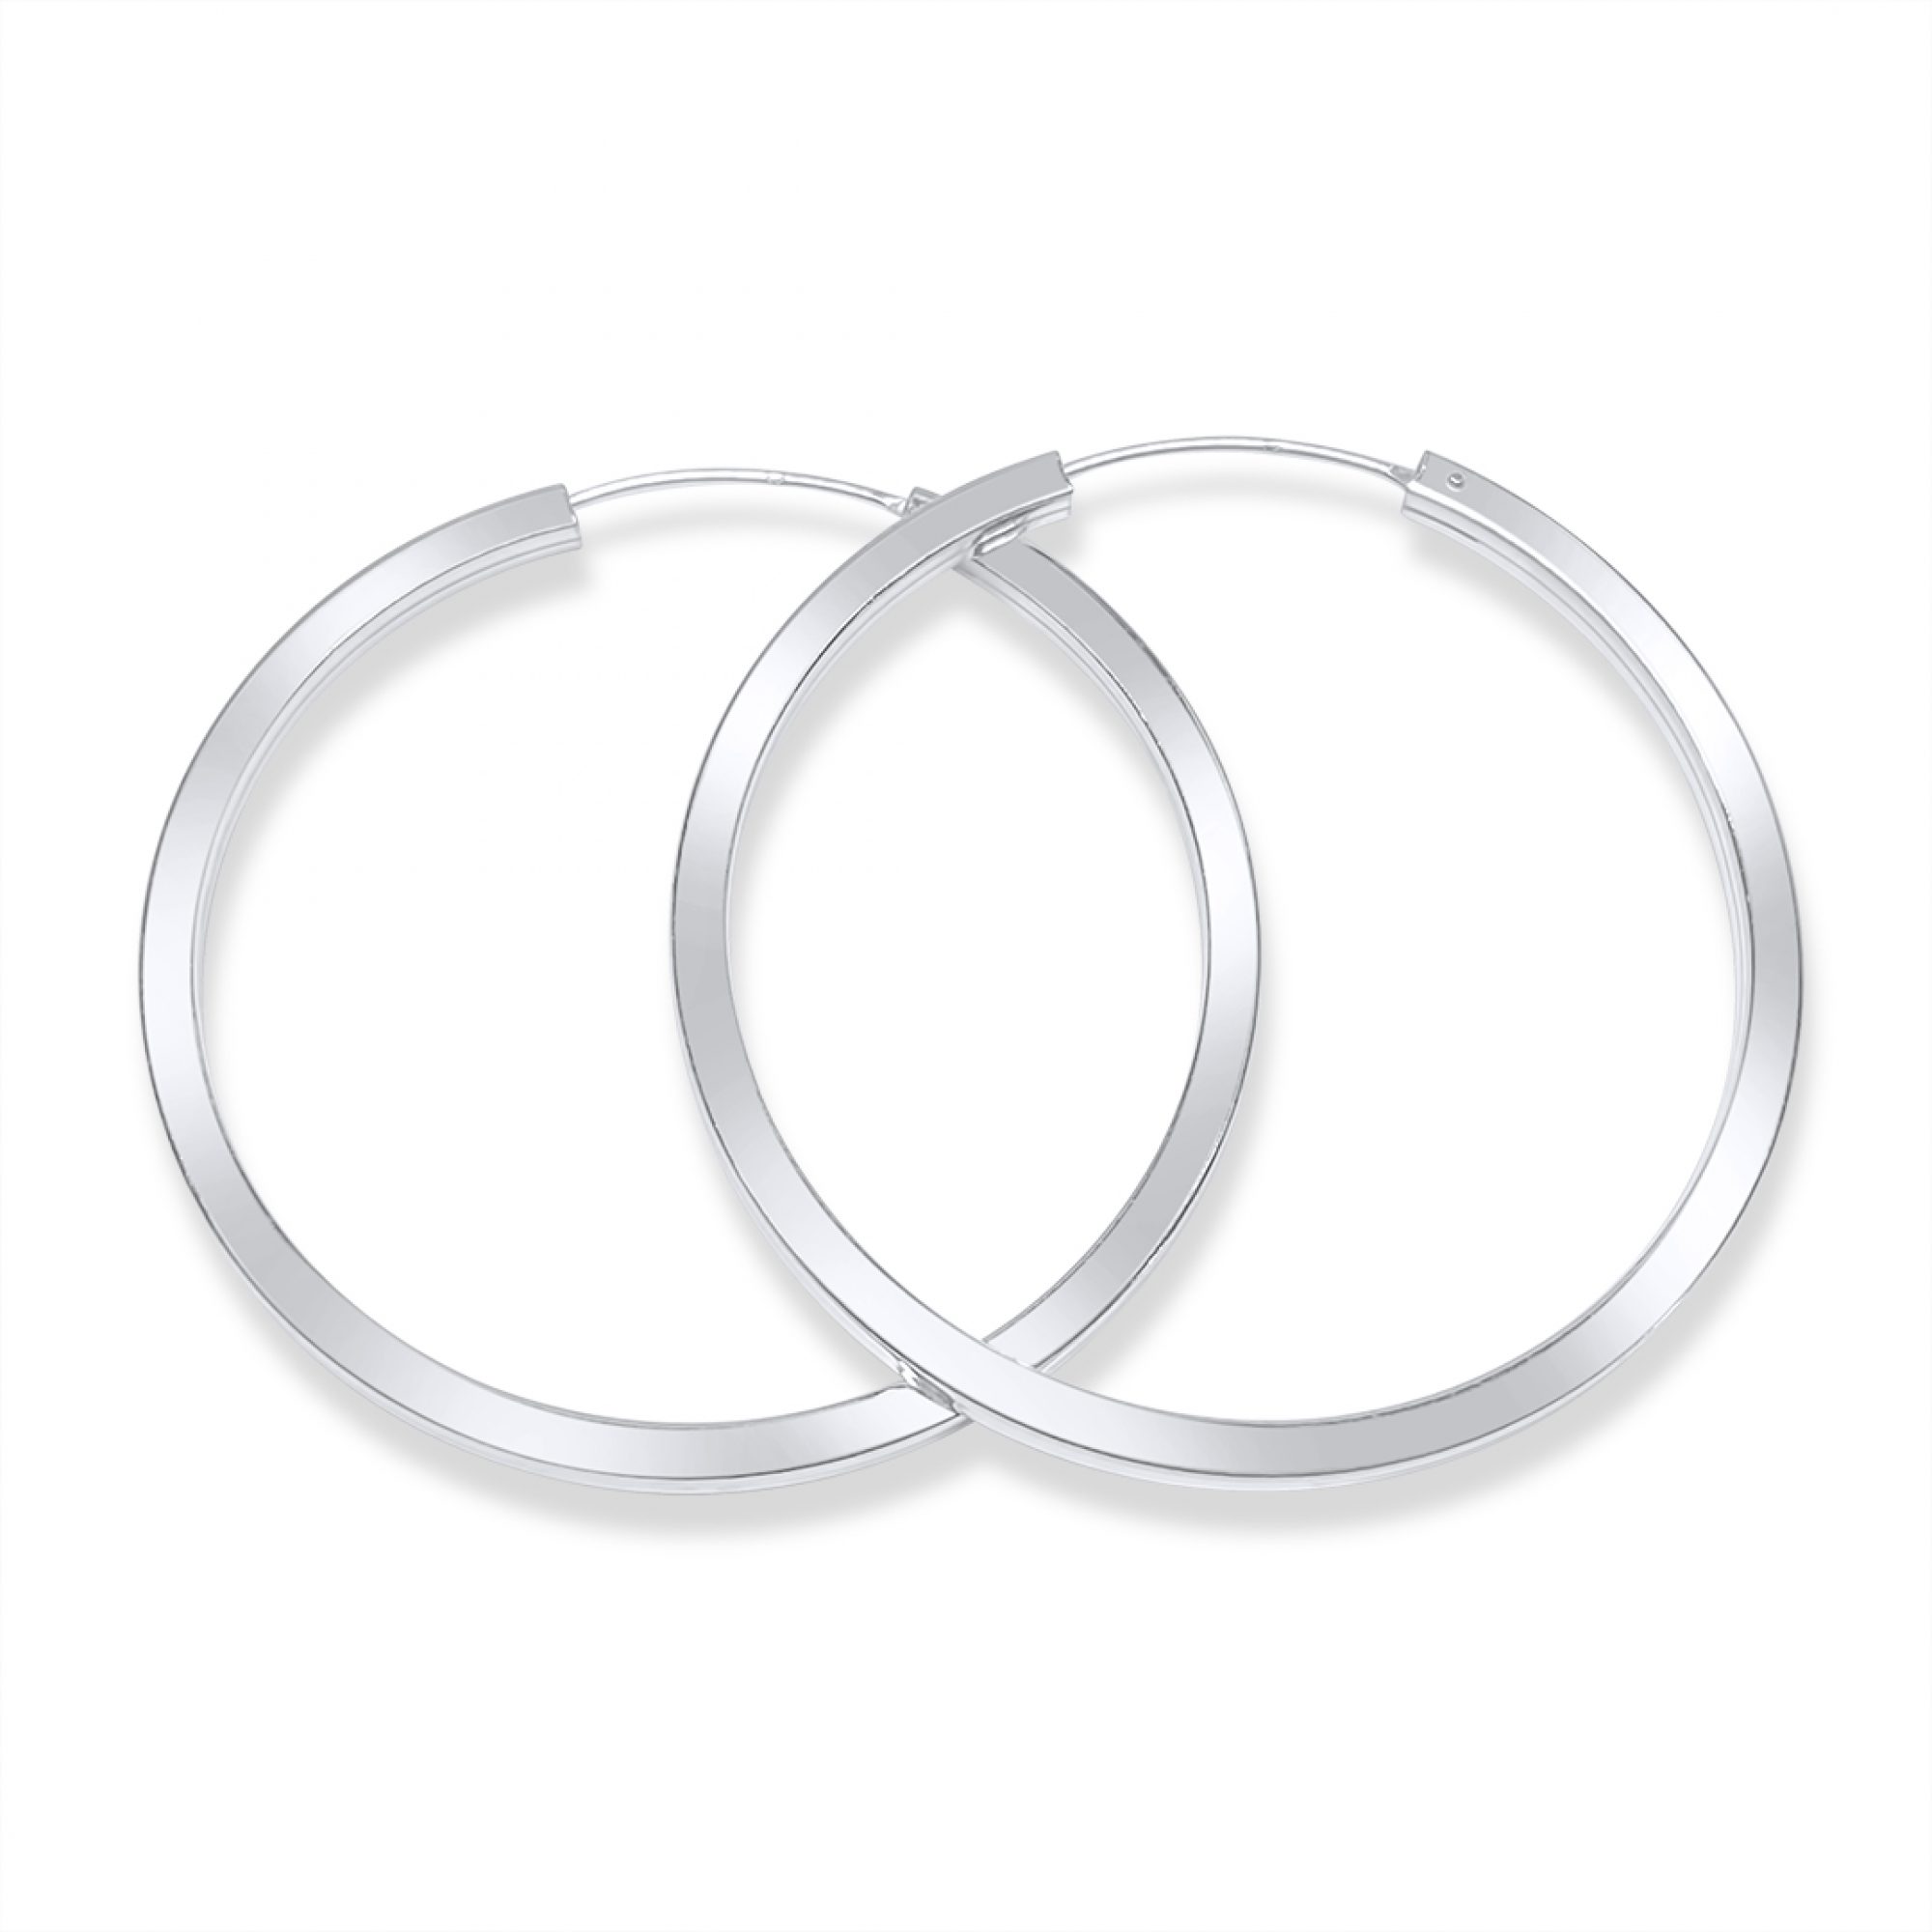 Silver cubic hoops (51mm)